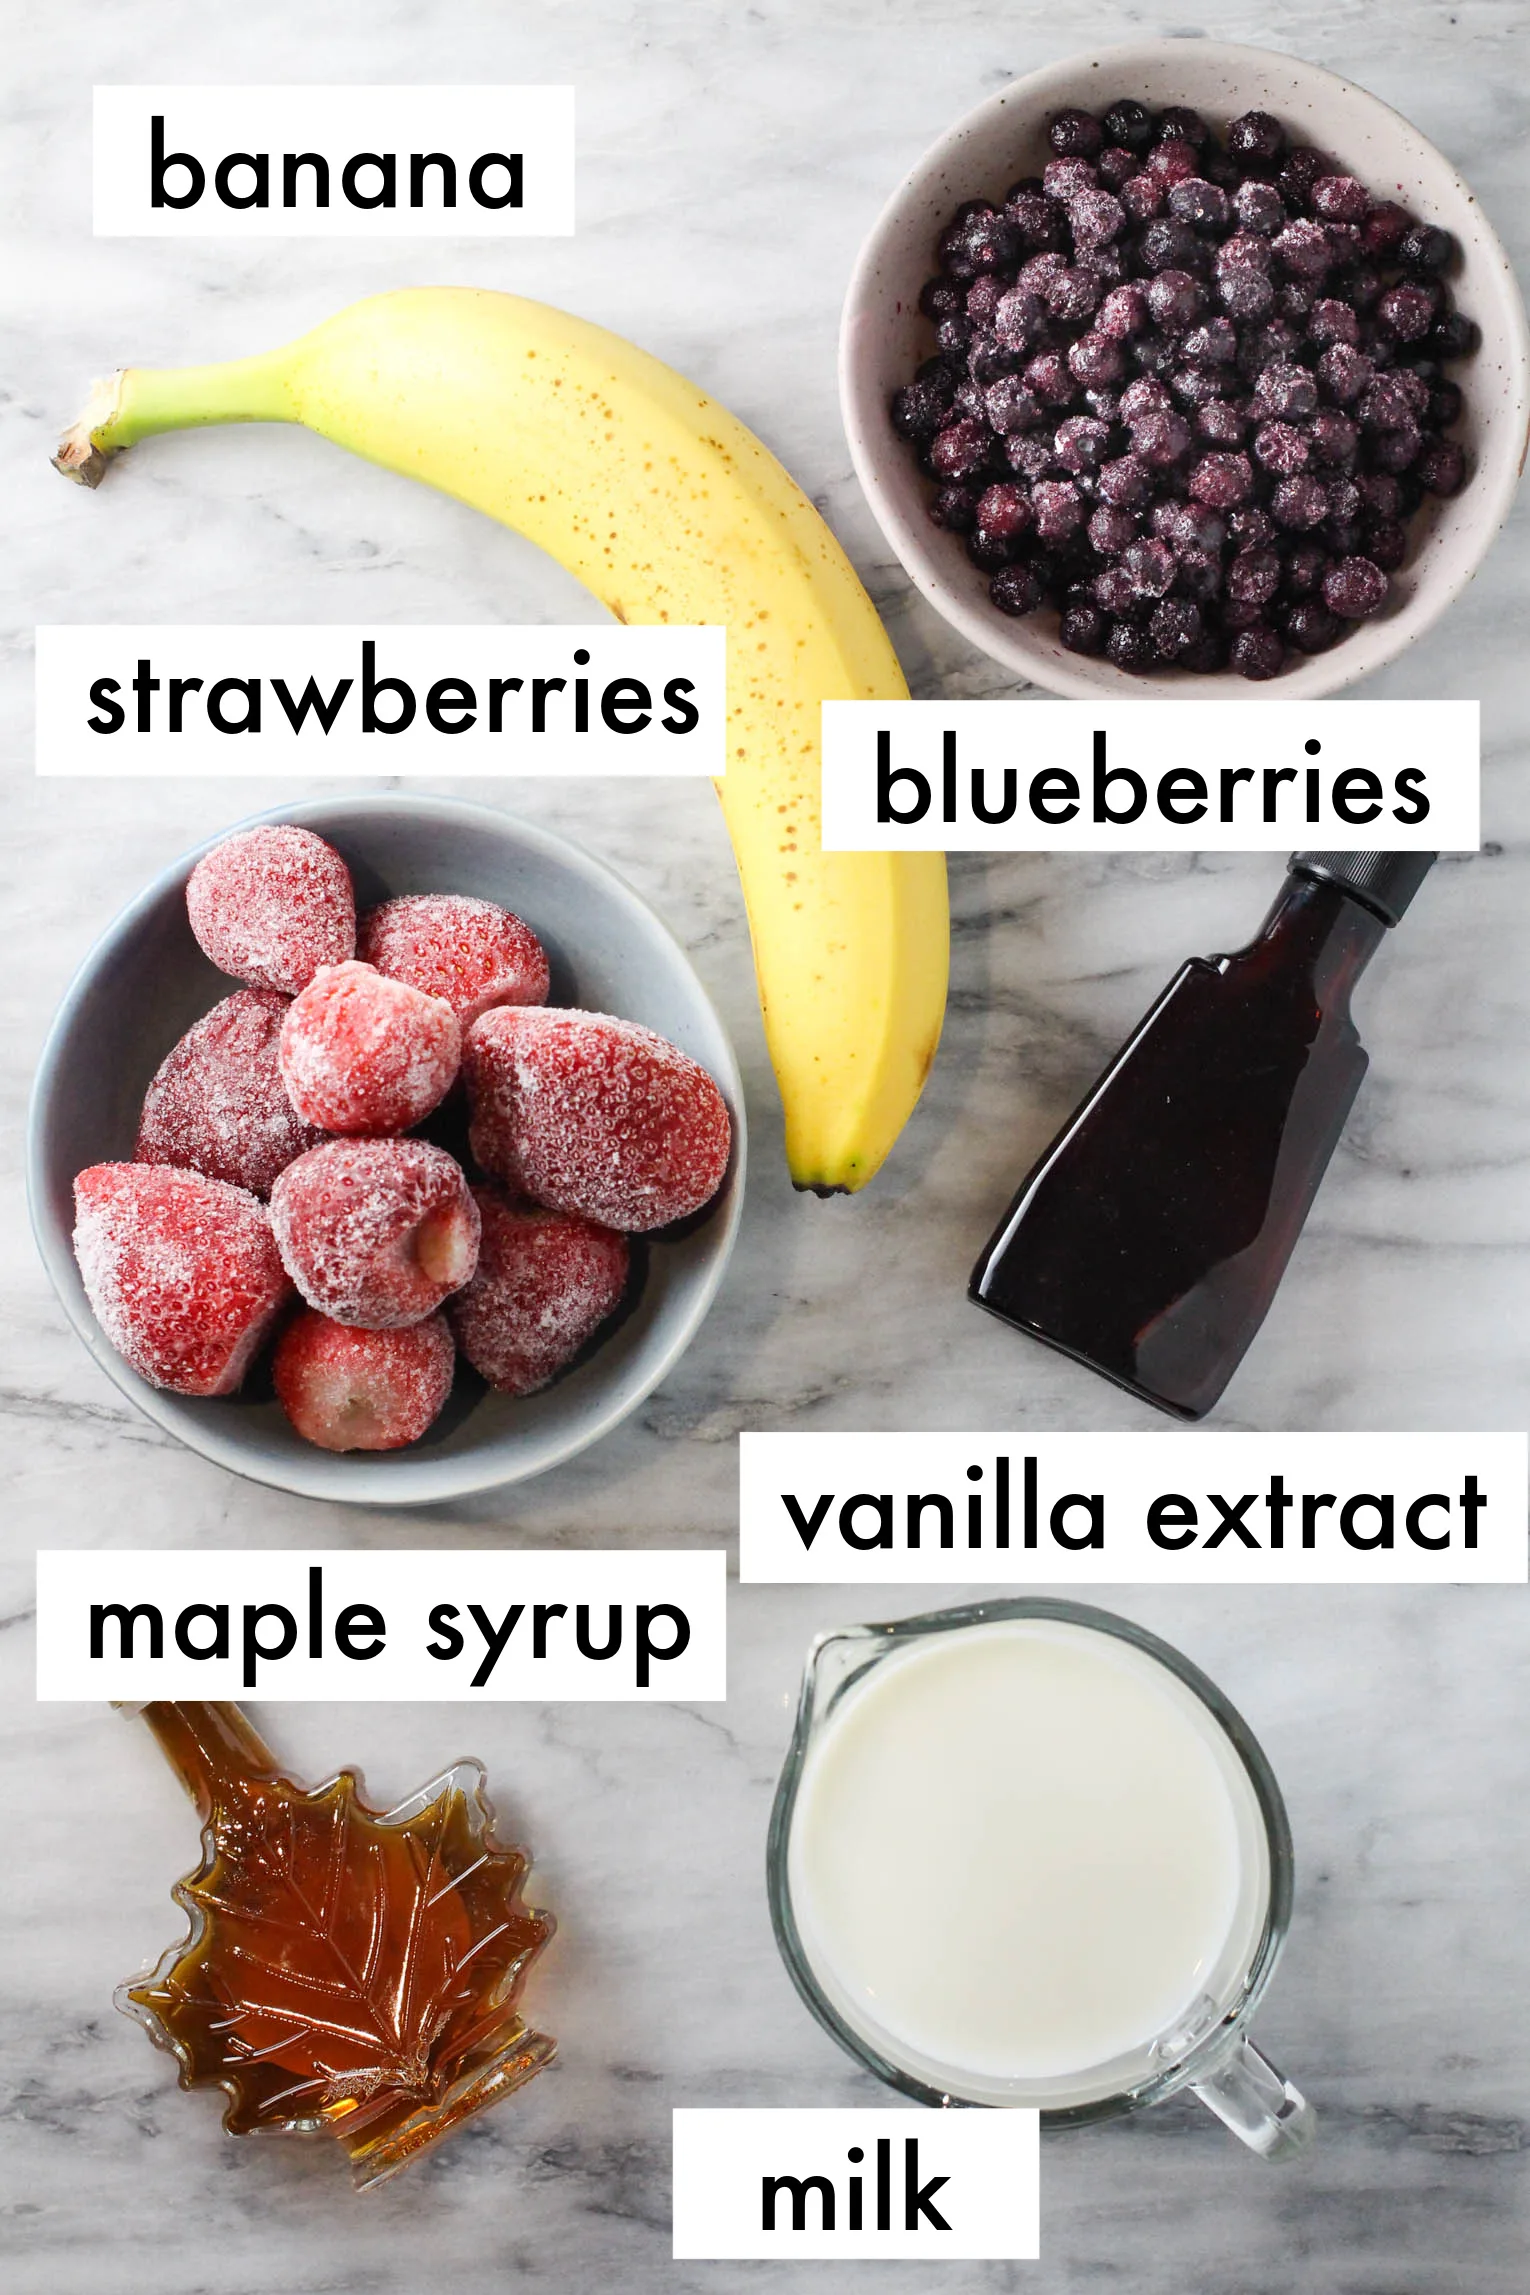 Smoothie ingredients labled as follows: banana, strawberries, blueberries, maple syrup, vanilla extract, milk.